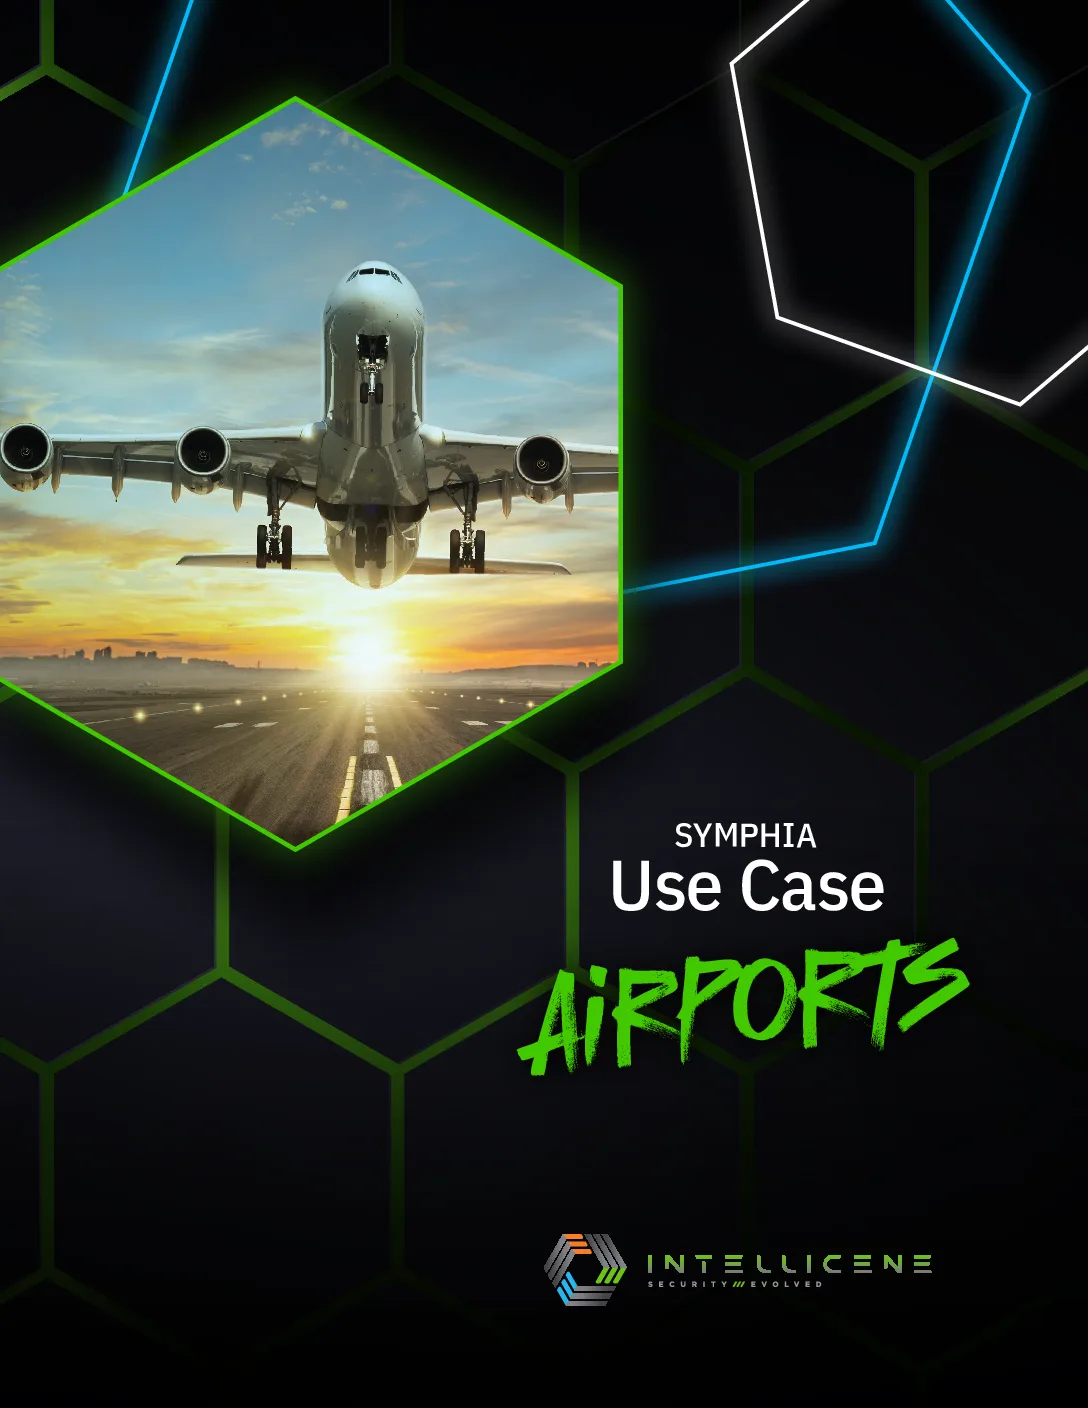 INTEL_0051_USE_CASE_AIRPORTS_FINAL